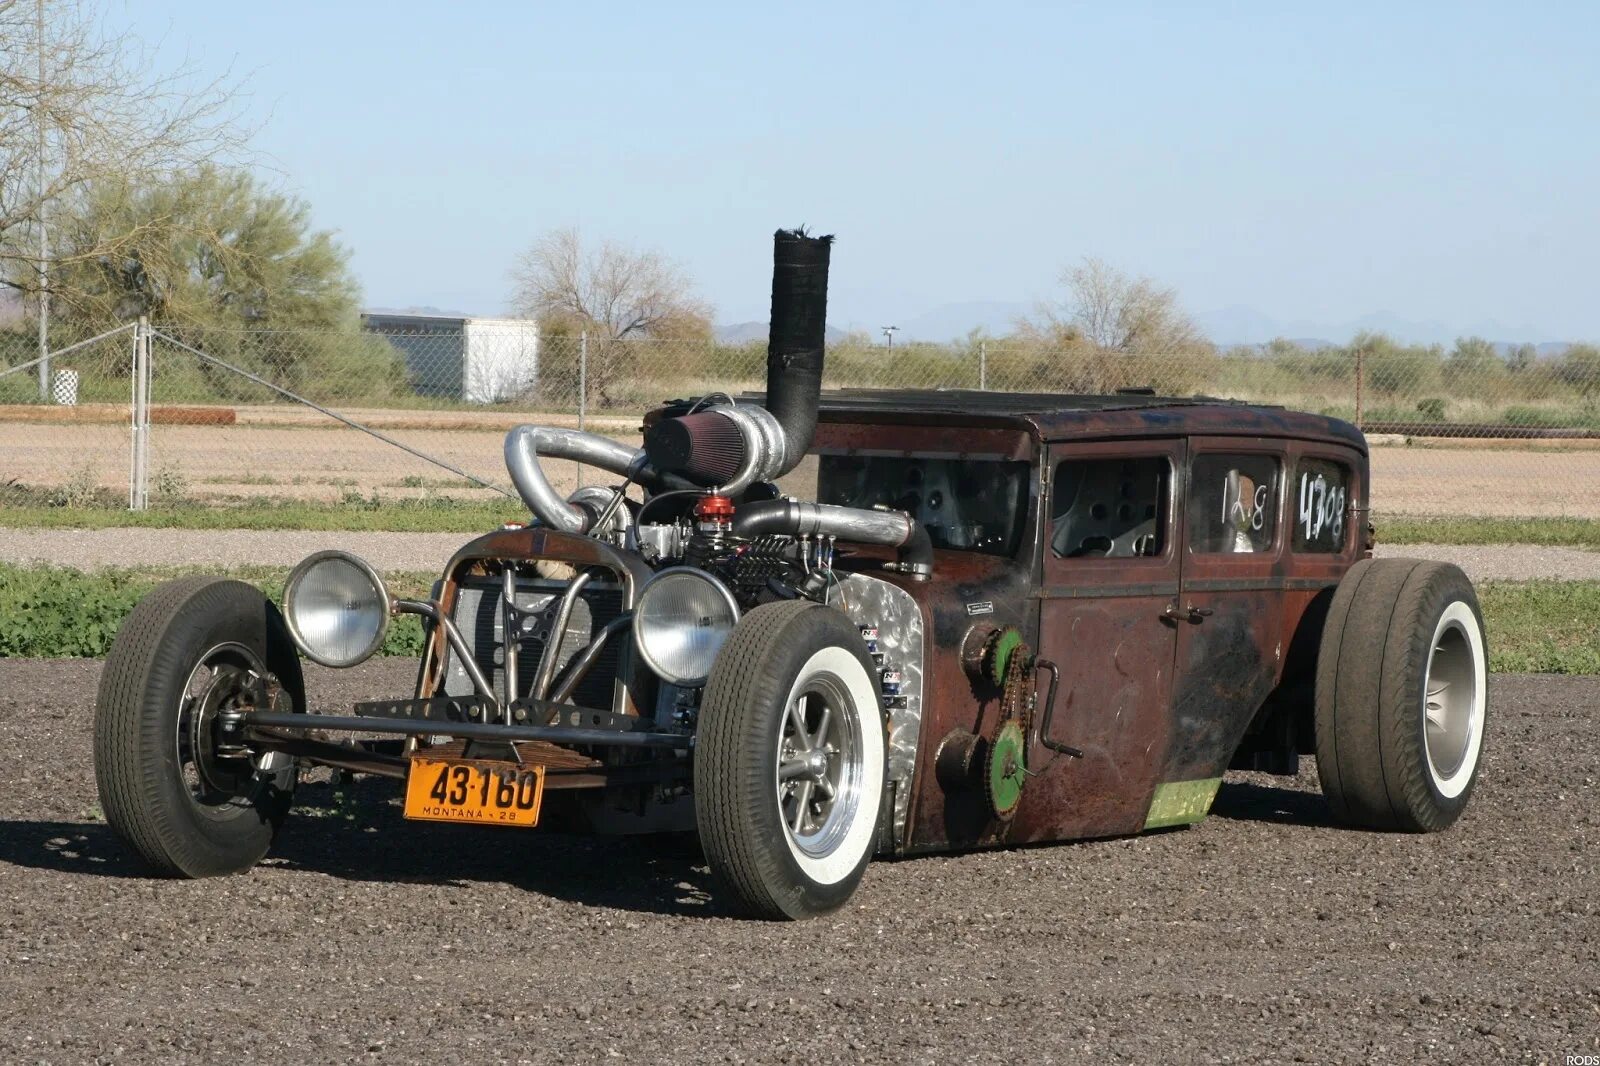 Найти рат. Хот род Рэт род. 35 Ford rat Rod. Рэт род дизель. Рэт род Хаммер.